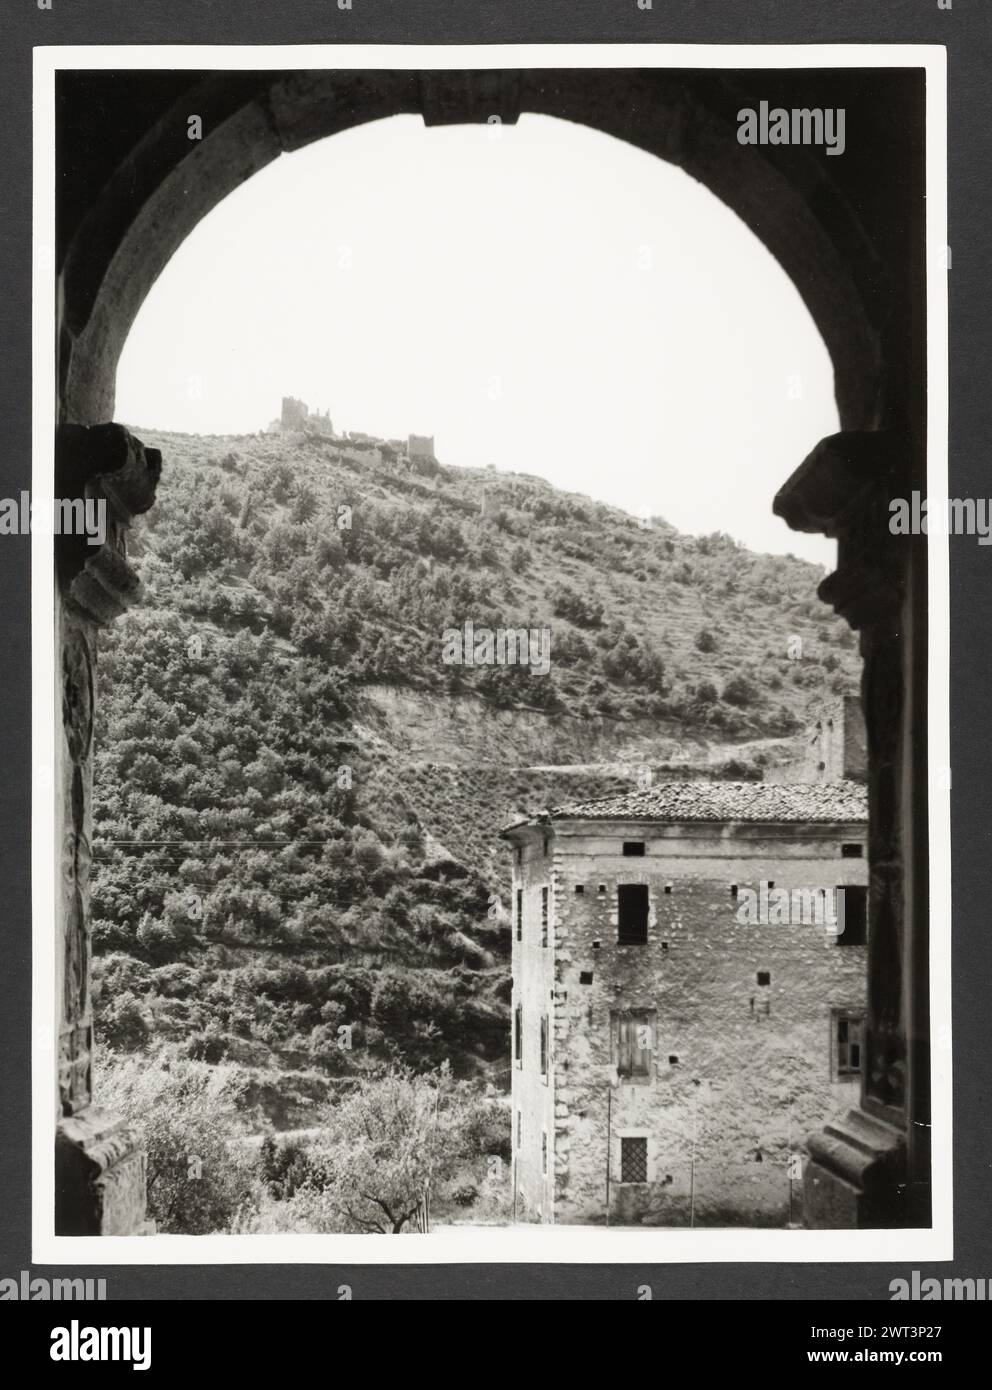 Lazio Frosinone Roccasecca Panoramic views. Hutzel, Max 1960-1990 Post-medieval: Architecture. Panoramic views of the city. German-born photographer and scholar Max Hutzel (1911-1988) photographed in Italy from the early 1960s until his death. The result of this project, referred to by Hutzel as Foto Arte Minore, is thorough documentation of art historical development in Italy up to the 18th century, including objects of the Etruscans and the Romans, as well as early Medieval, Romanesque, Gothic, Renaissance and Baroque monuments. Images are organized by geographic region in Italy, then by pro Stock Photo